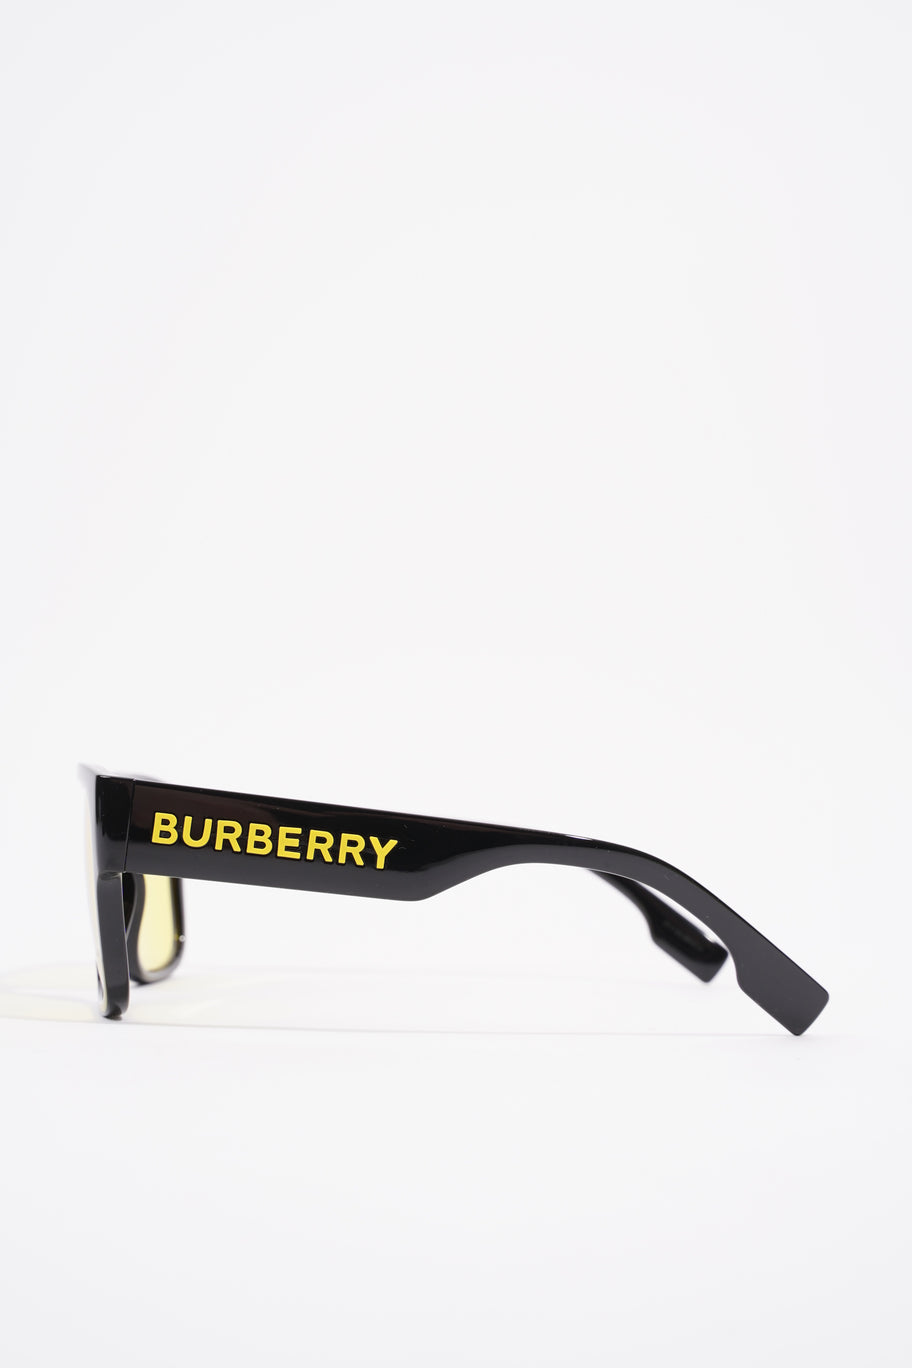 Knight Square Tinted Sunglasses Black / Yellow Acetate 145mm Image 3